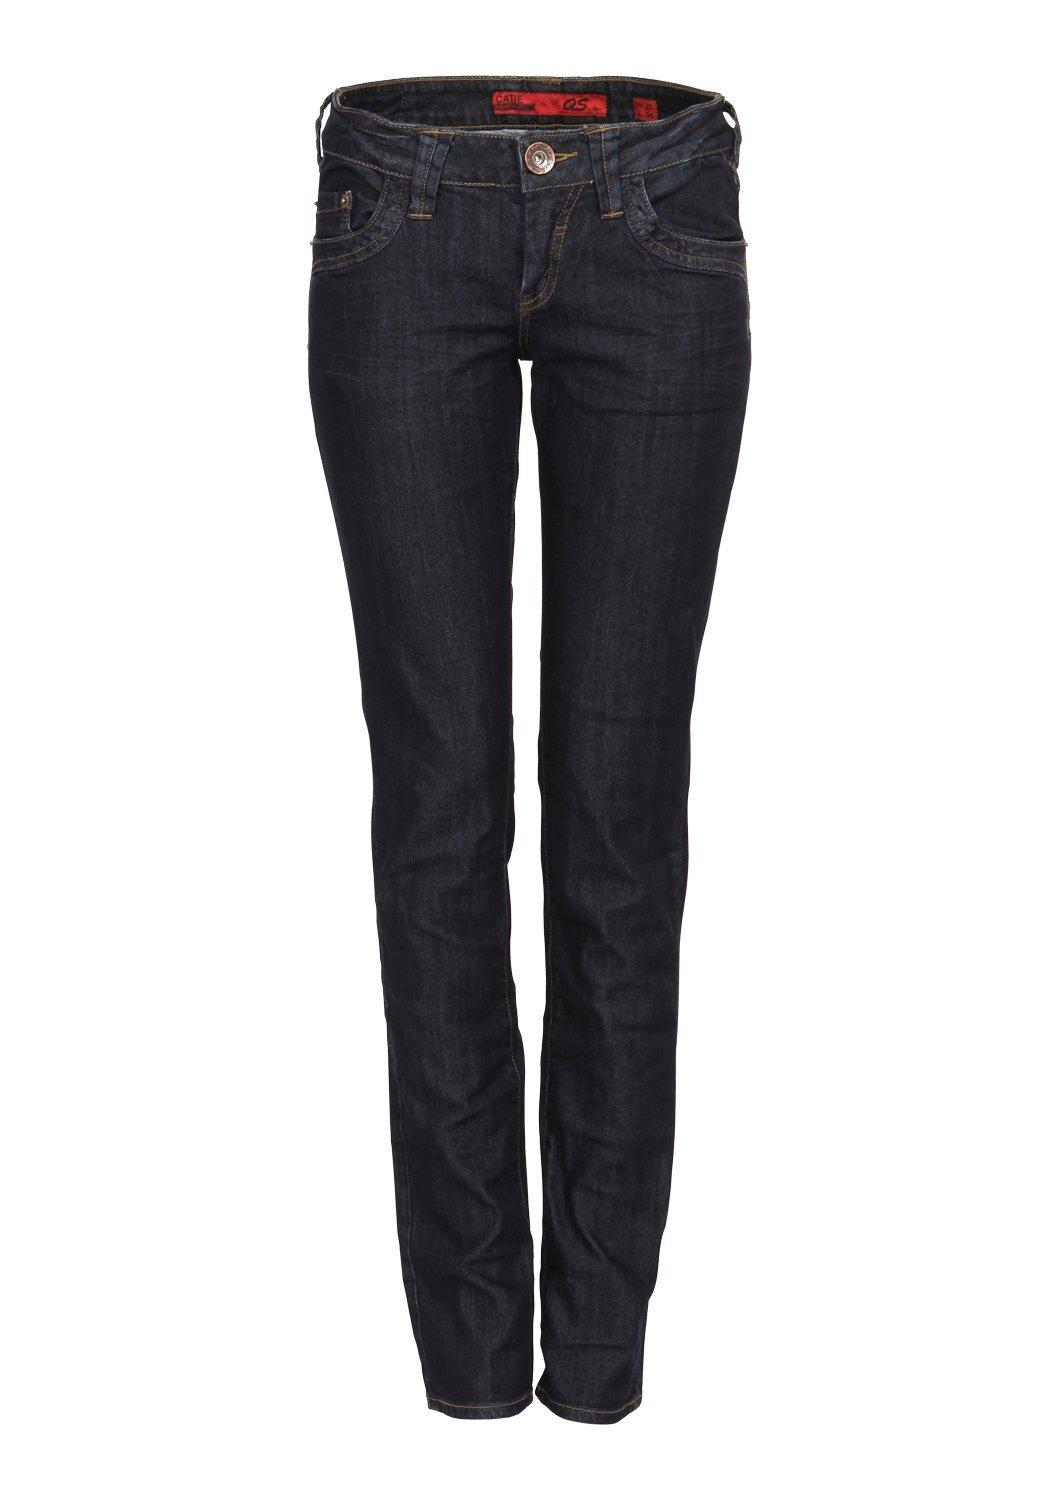 Slim fit jeans with a low rise waist 